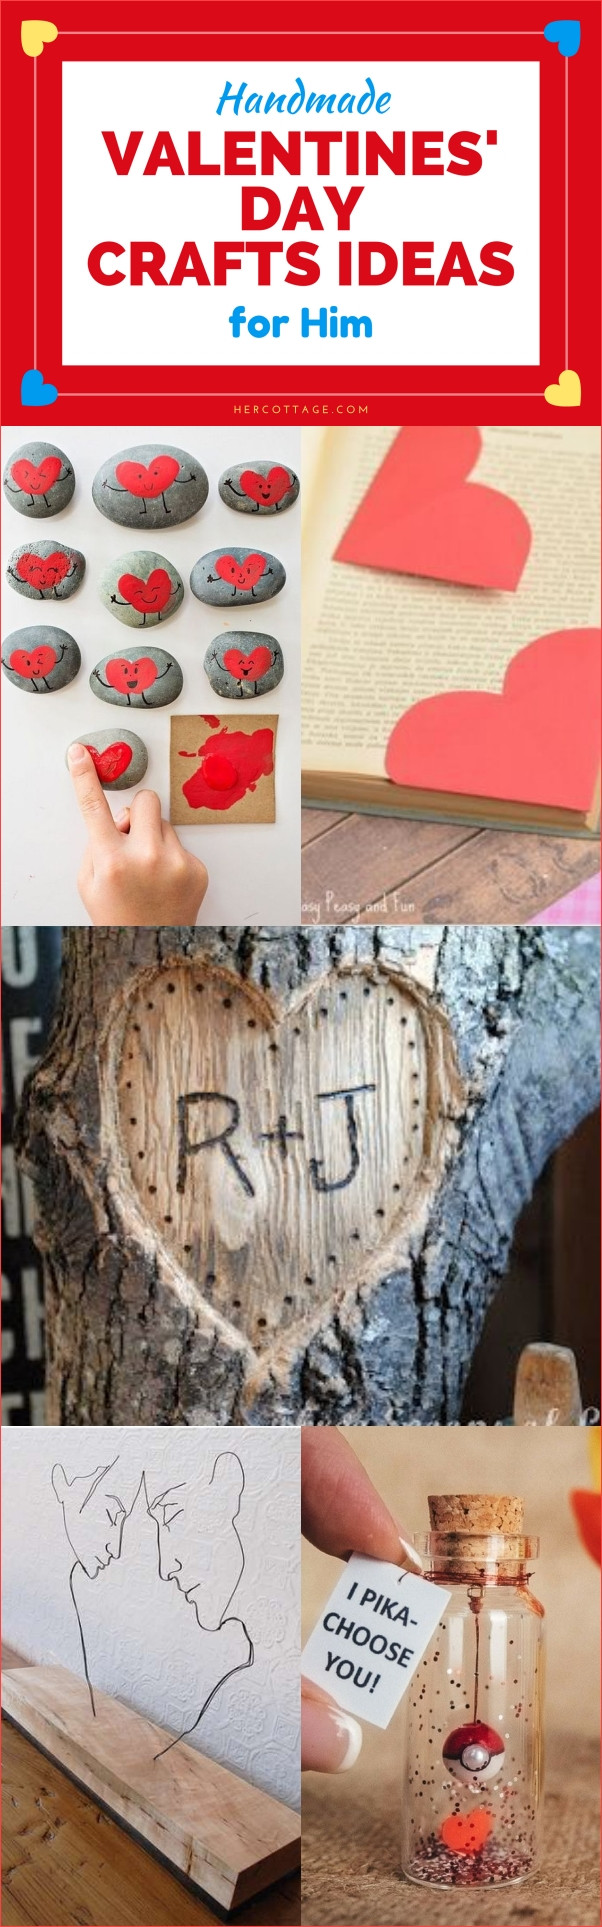 Great Valentines Day Ideas For Him
 32 Handmade Valentines Day Crafts Ideas for Him HERCOTTAGE